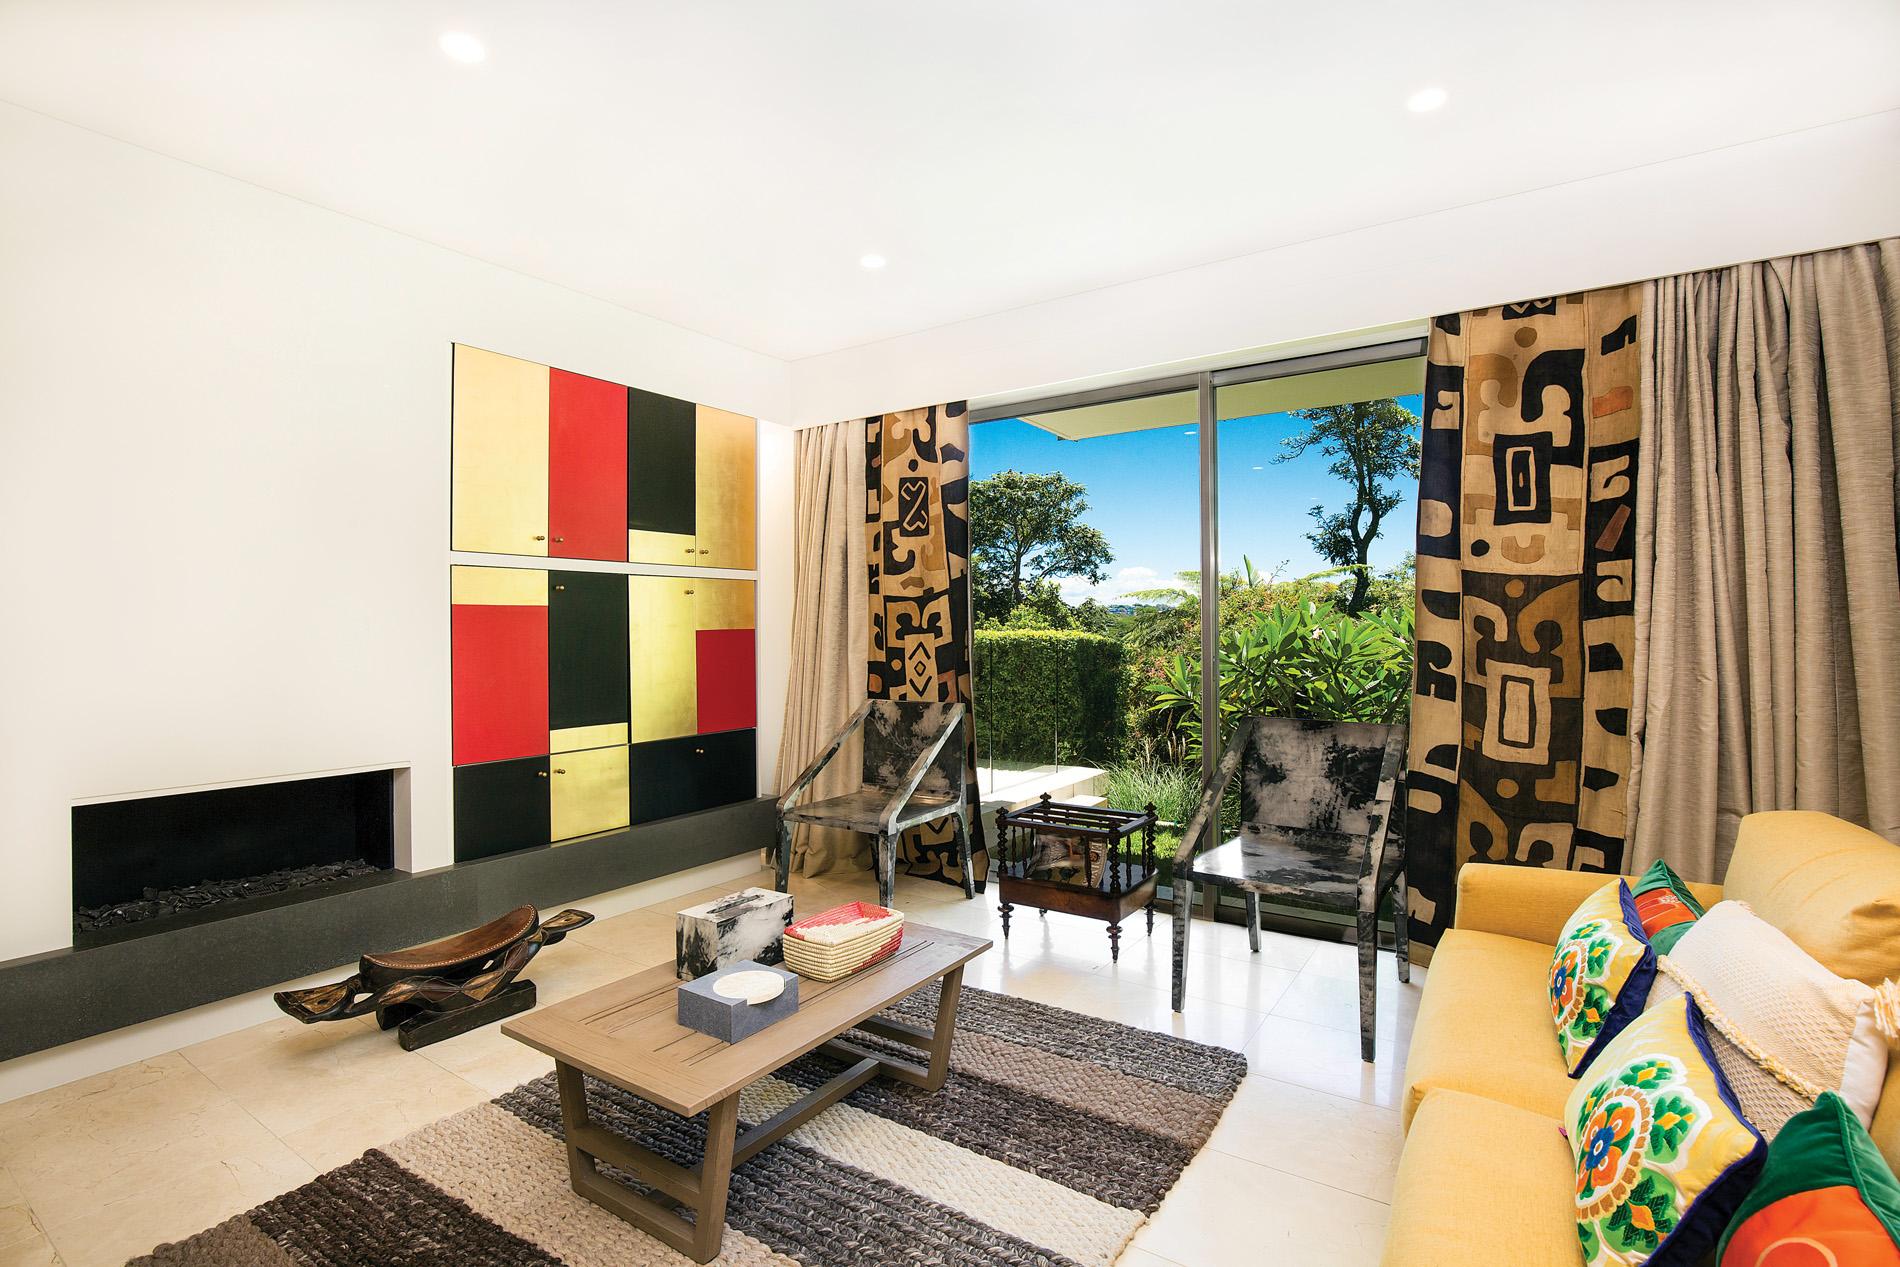 Home and Away: Laura Cheung’s Sydney Abode is Imbued with Family Treasures